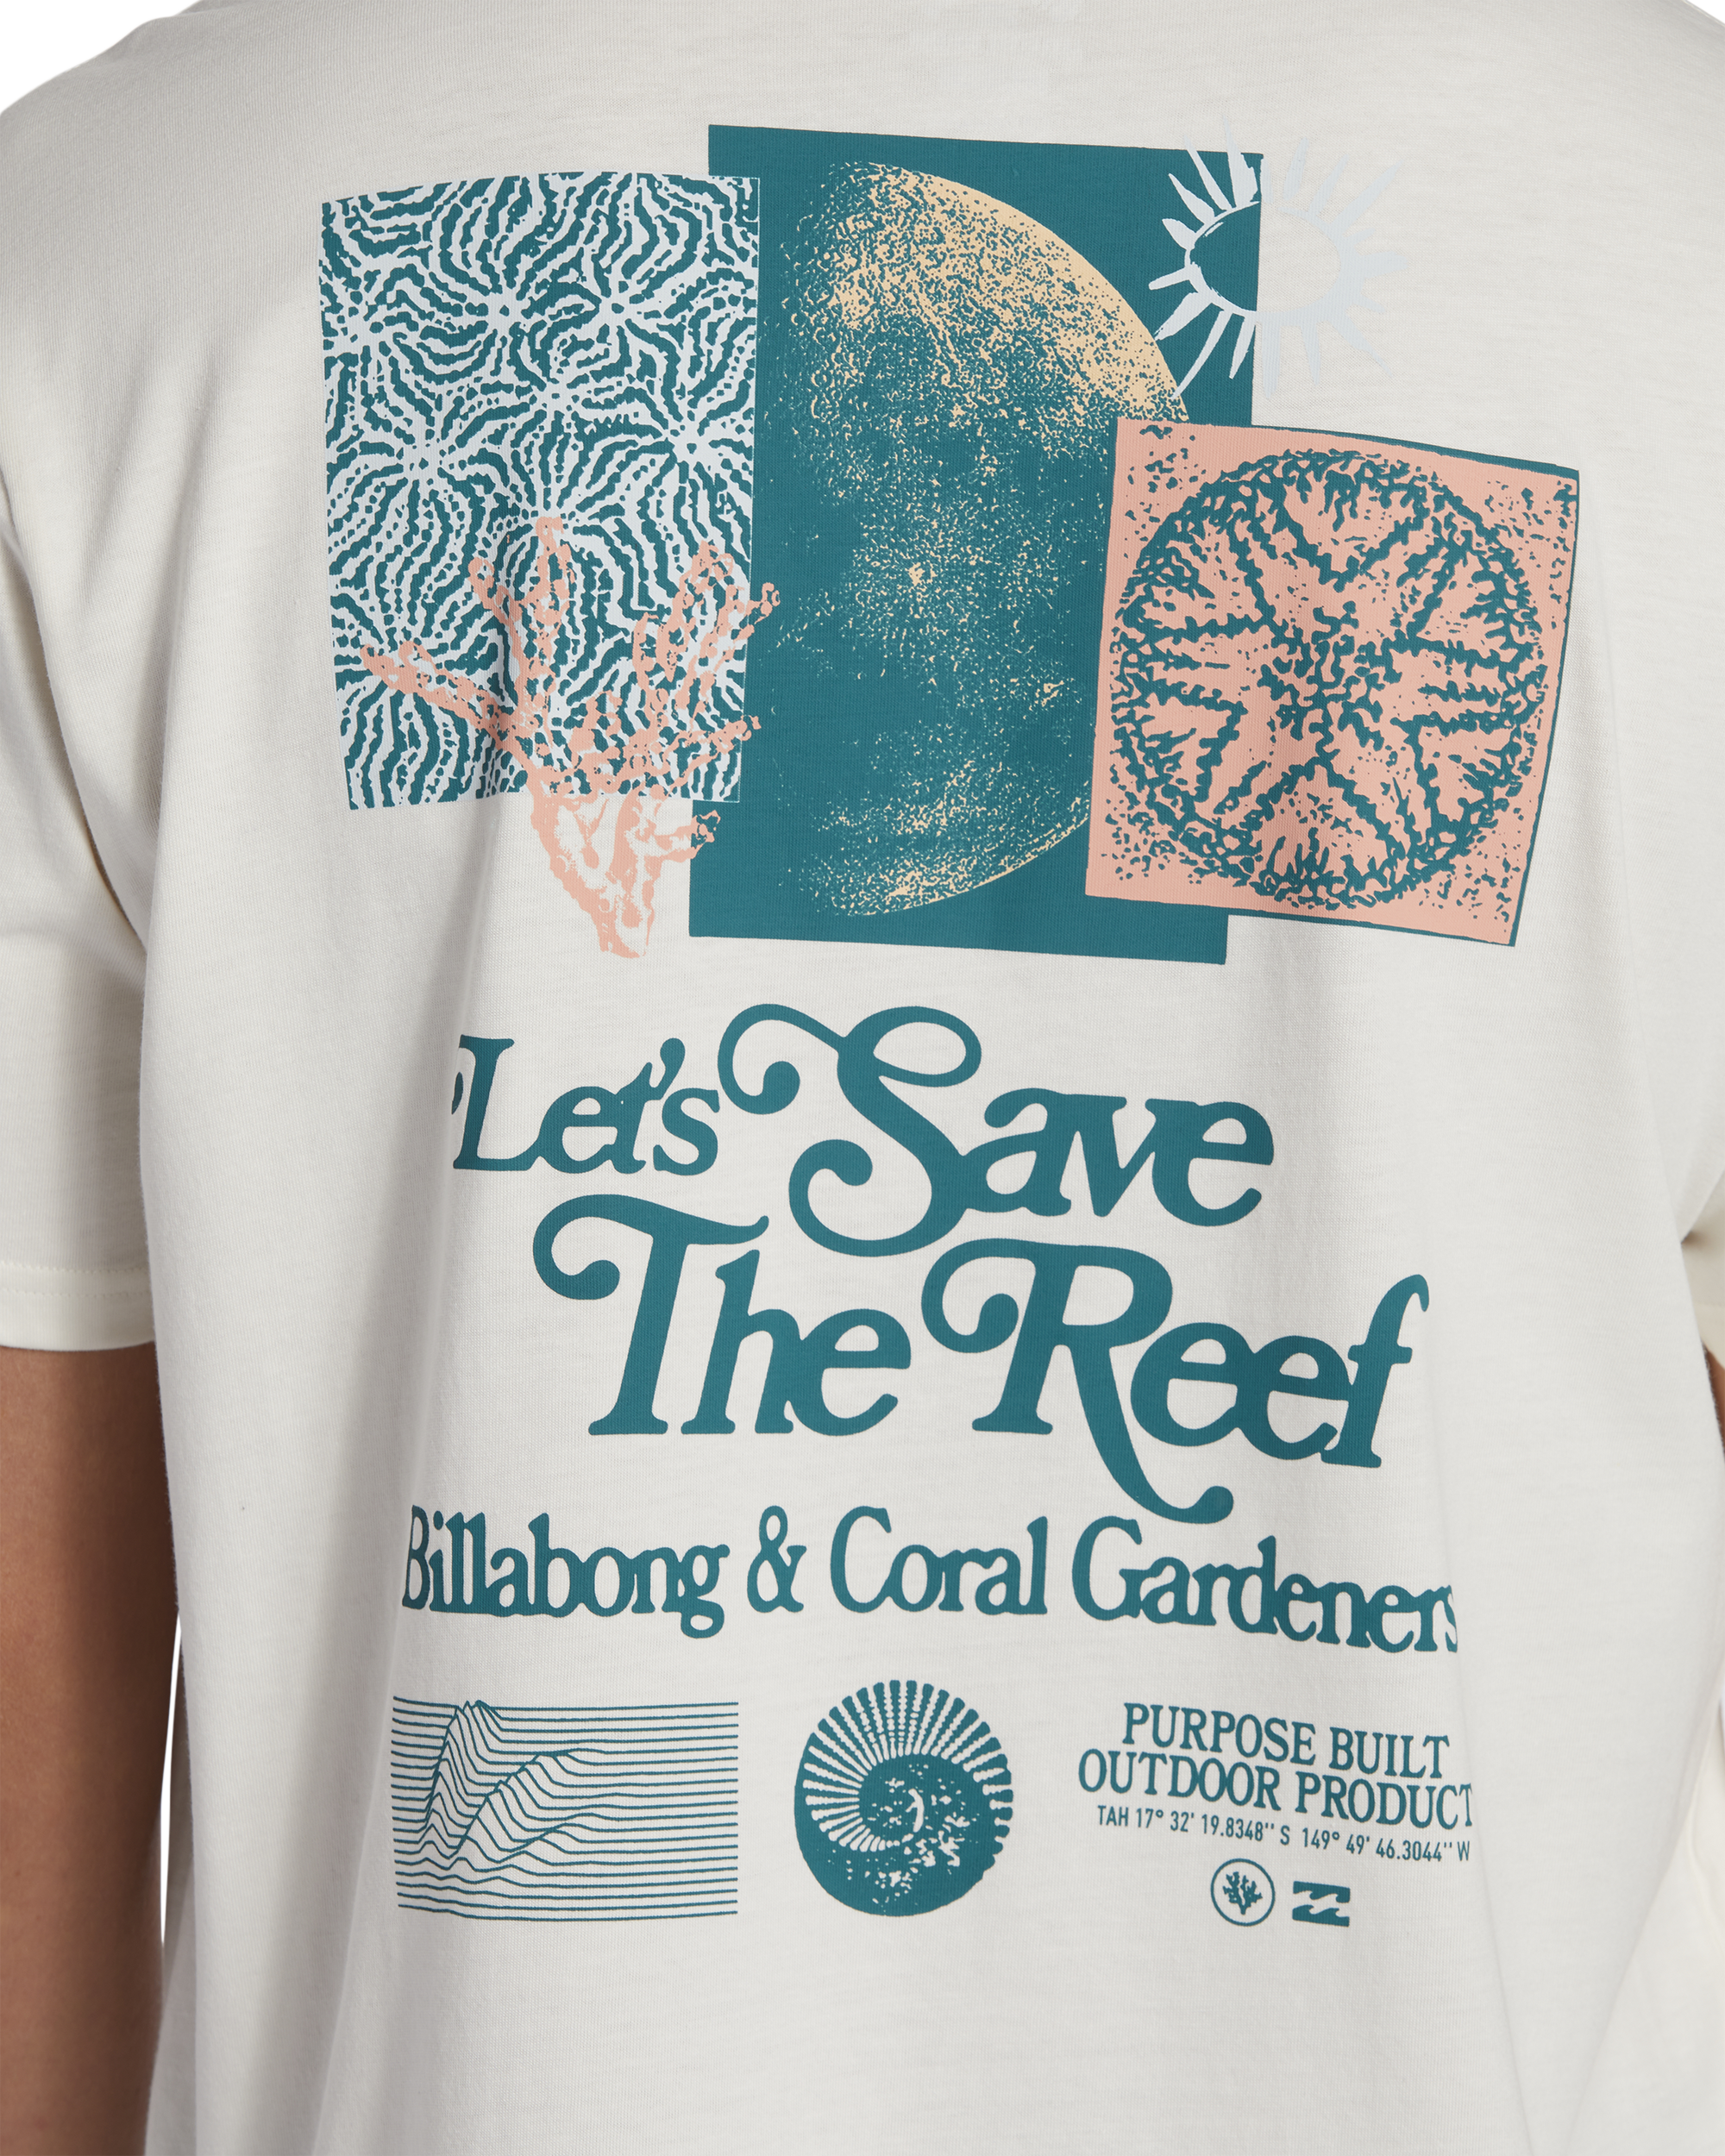 BILLABONG CG LETS SAVE THE REEF SS ABYZT02335-OFW T-SHIRT SHORT SLEEVE (M)